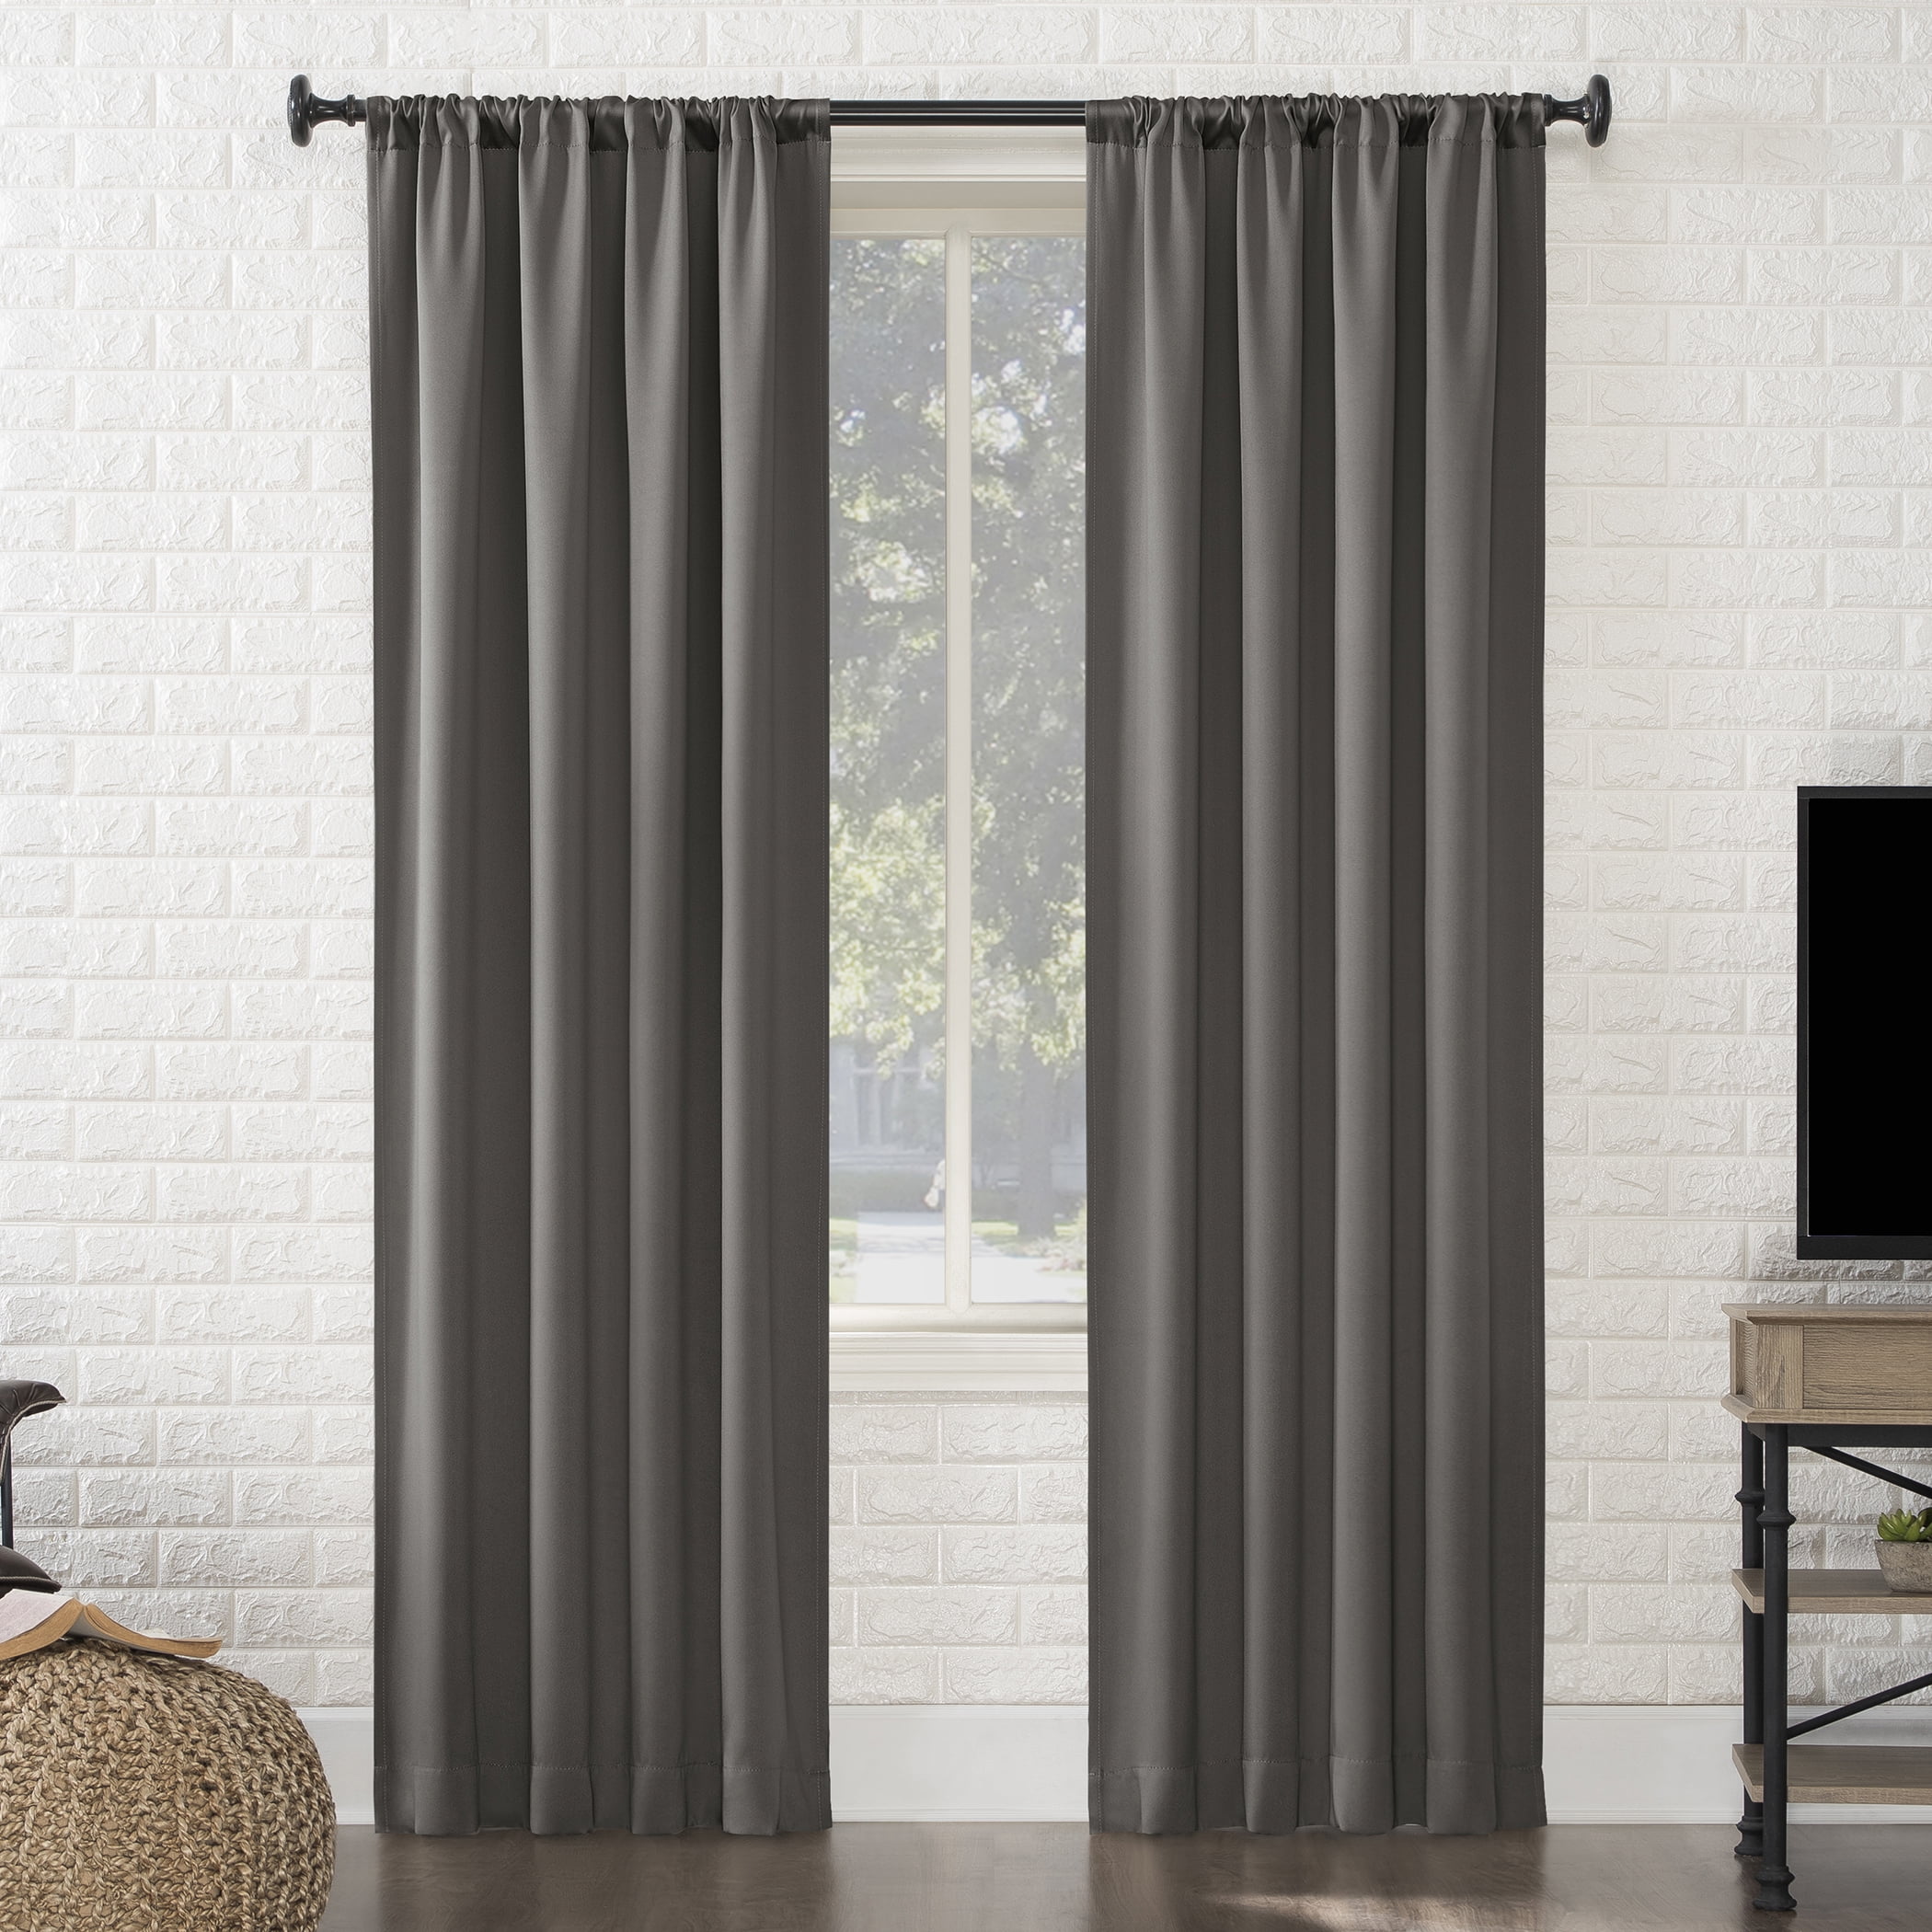 1PC WHITE SOLID PANEL 100% BLACKOUT GROMMET WINDOW CURTAIN BLACK LINED BACKING 